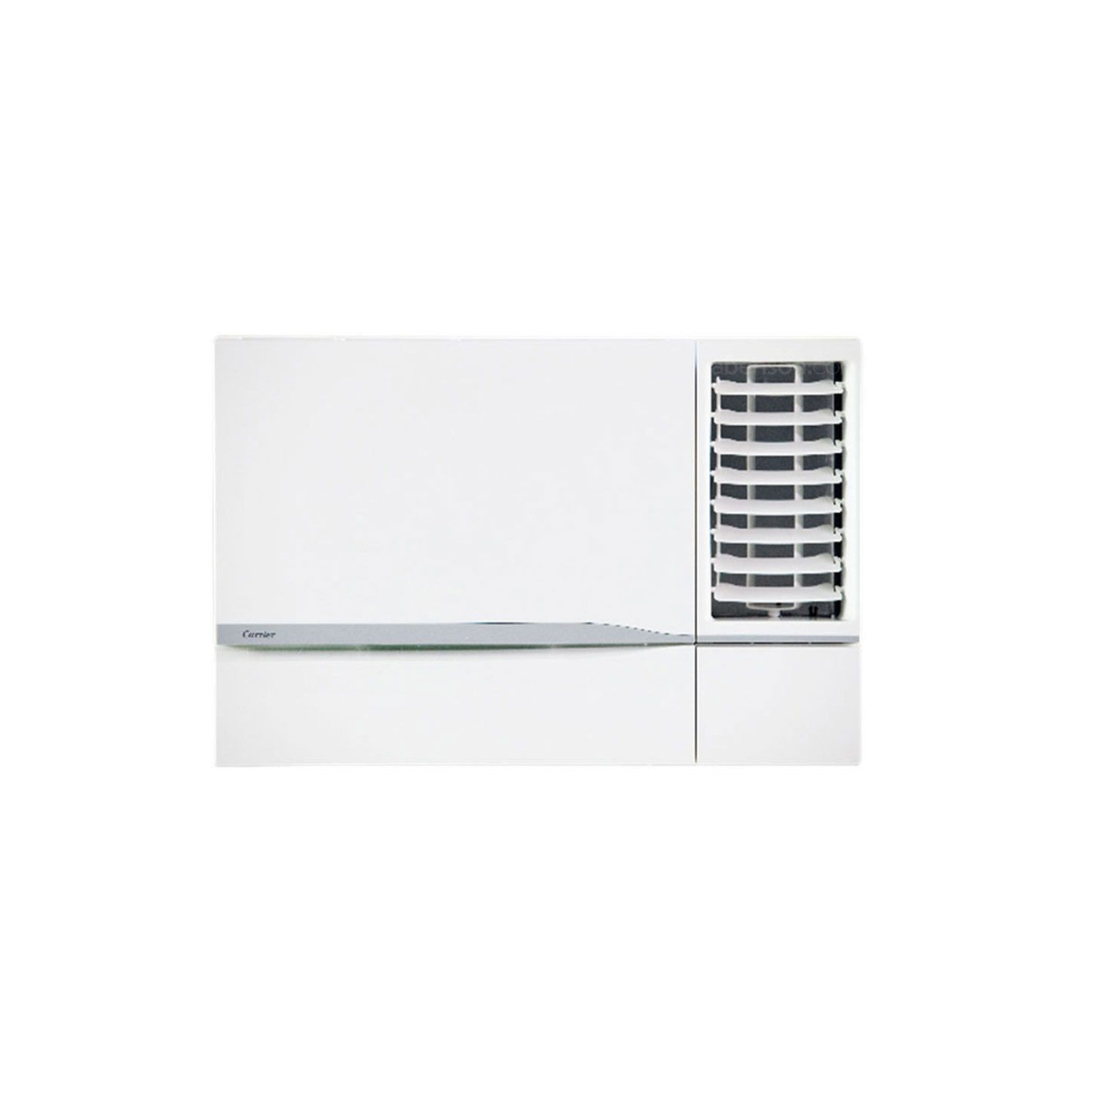 Carrier 0.75 HP Timer I-Cool Window-Type Air Conditioner (Class A)